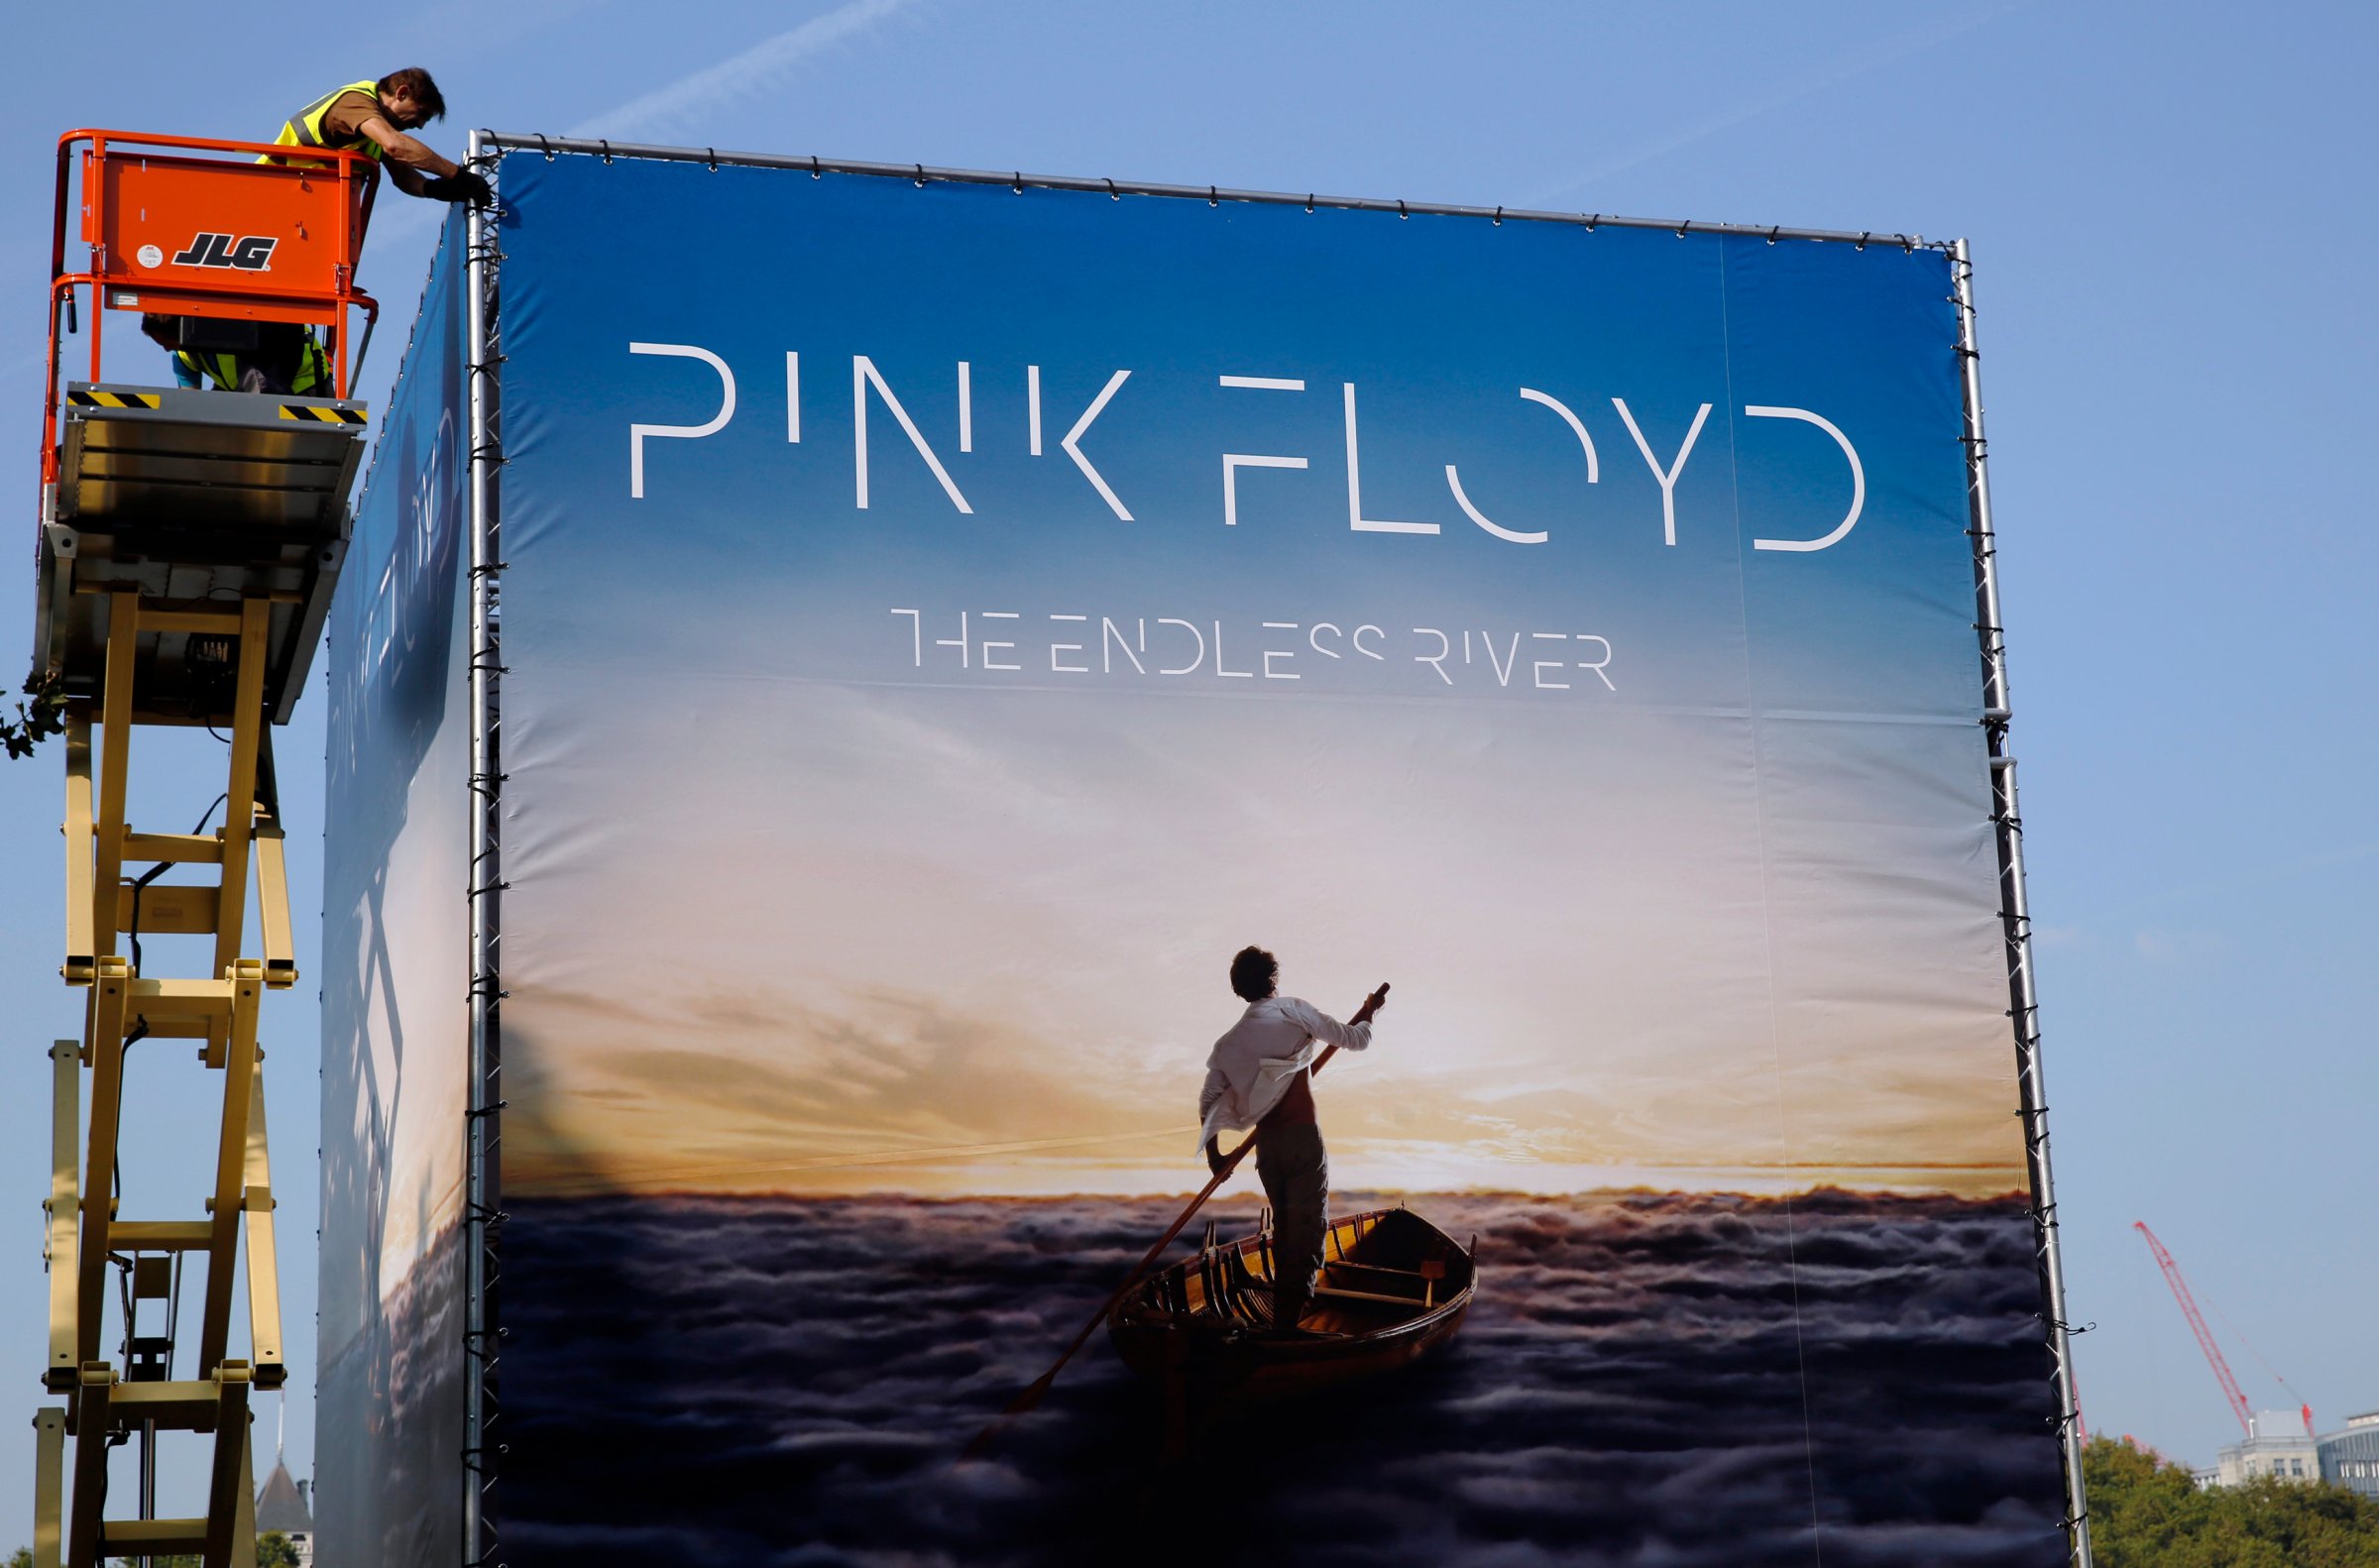 Advertising for the new Pink Floyd album "The Endless River" is installed on a four sided billboard on the South Bank in London